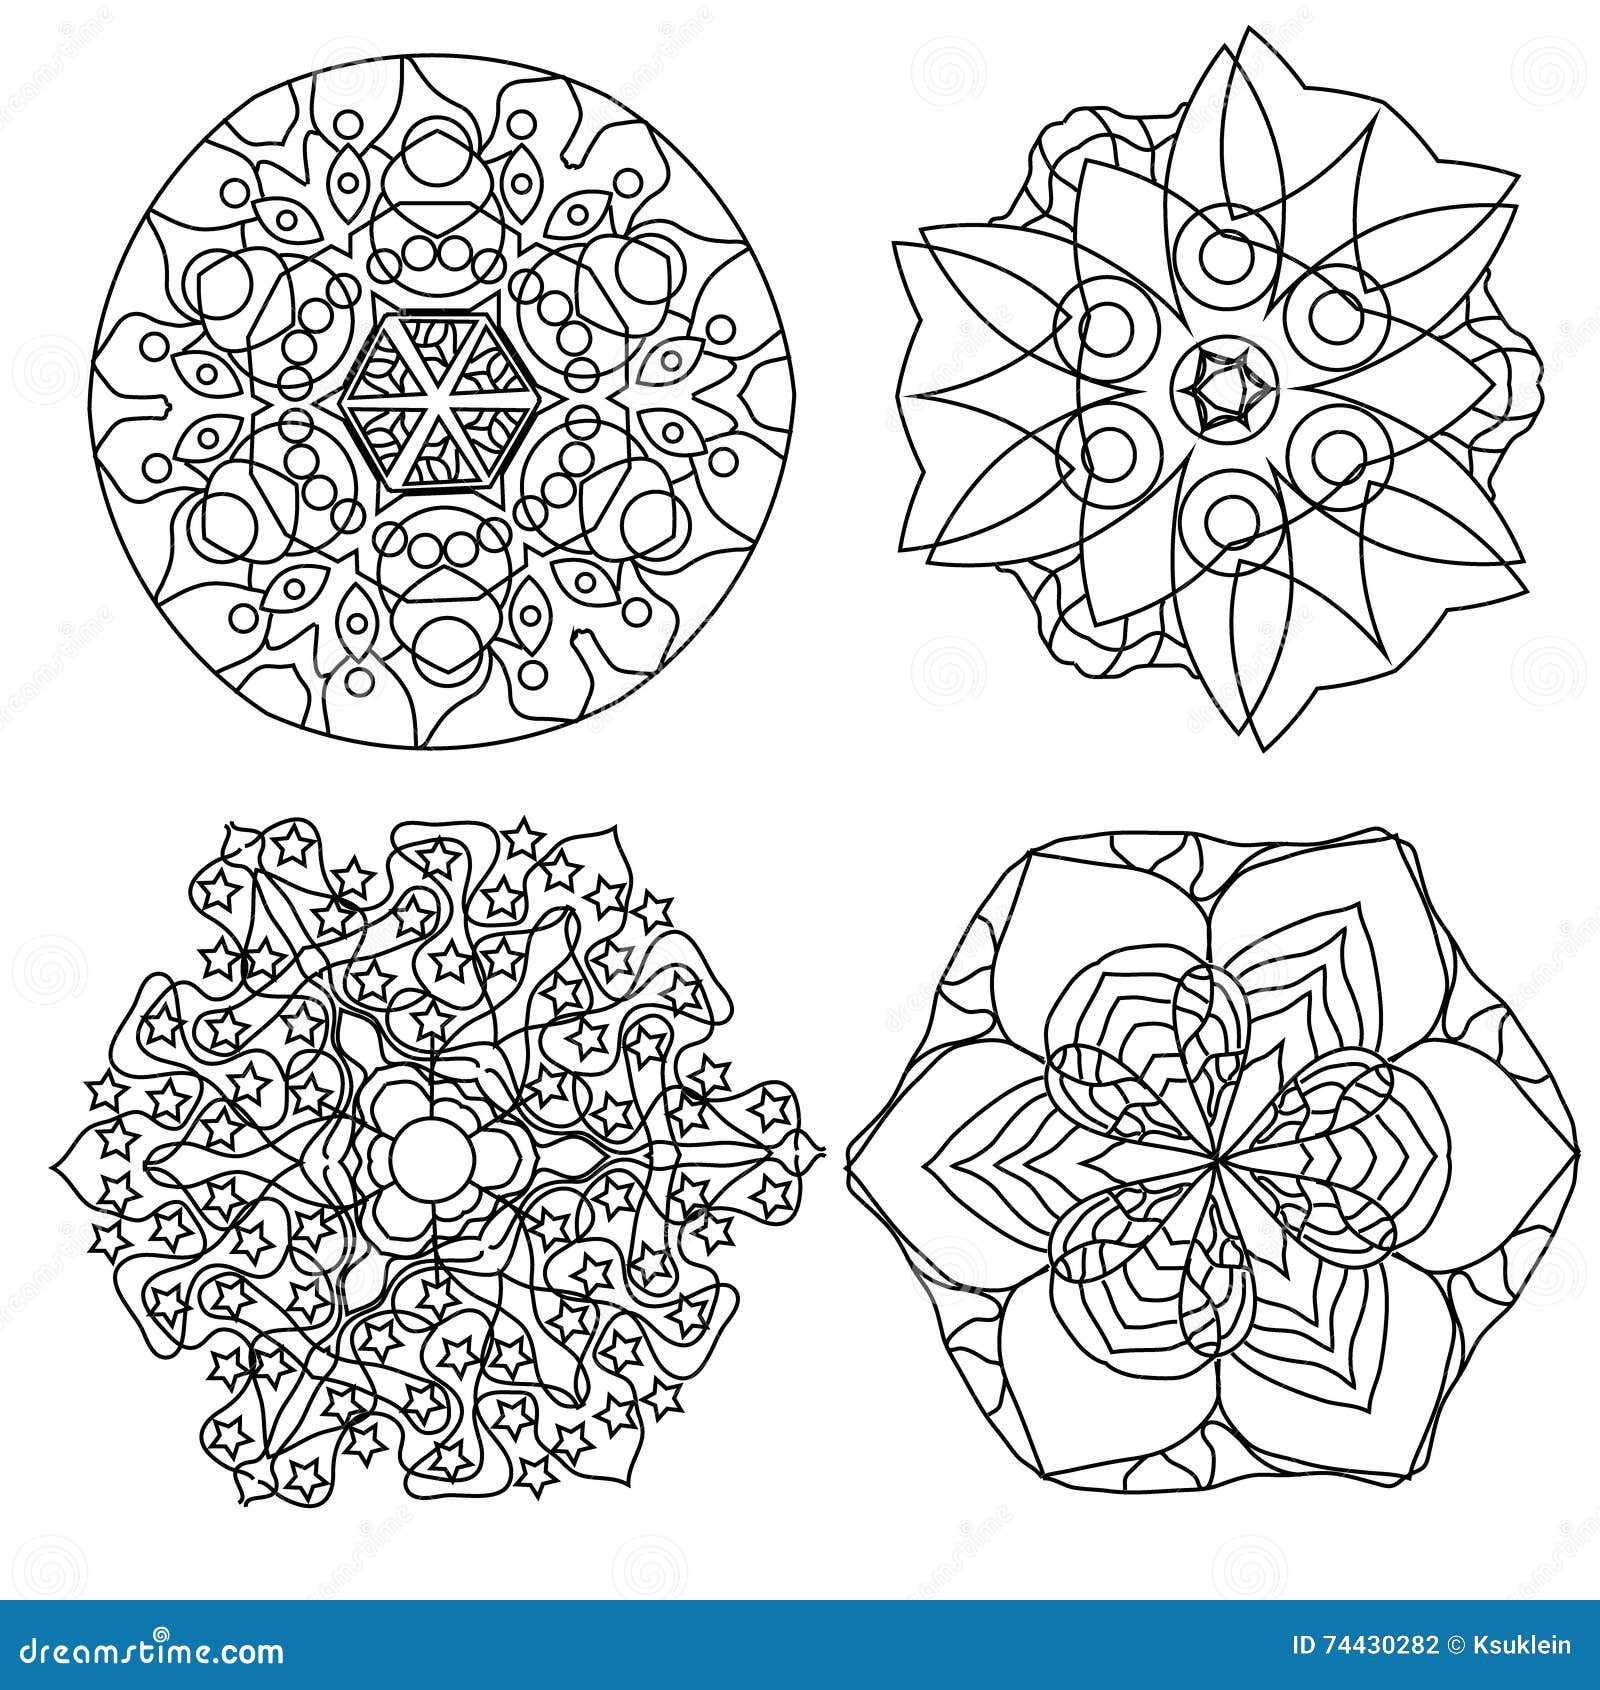 Relaxing Coloring Page With Mandala, Abstract Flowers For Kids And Adults, Art Therapy 